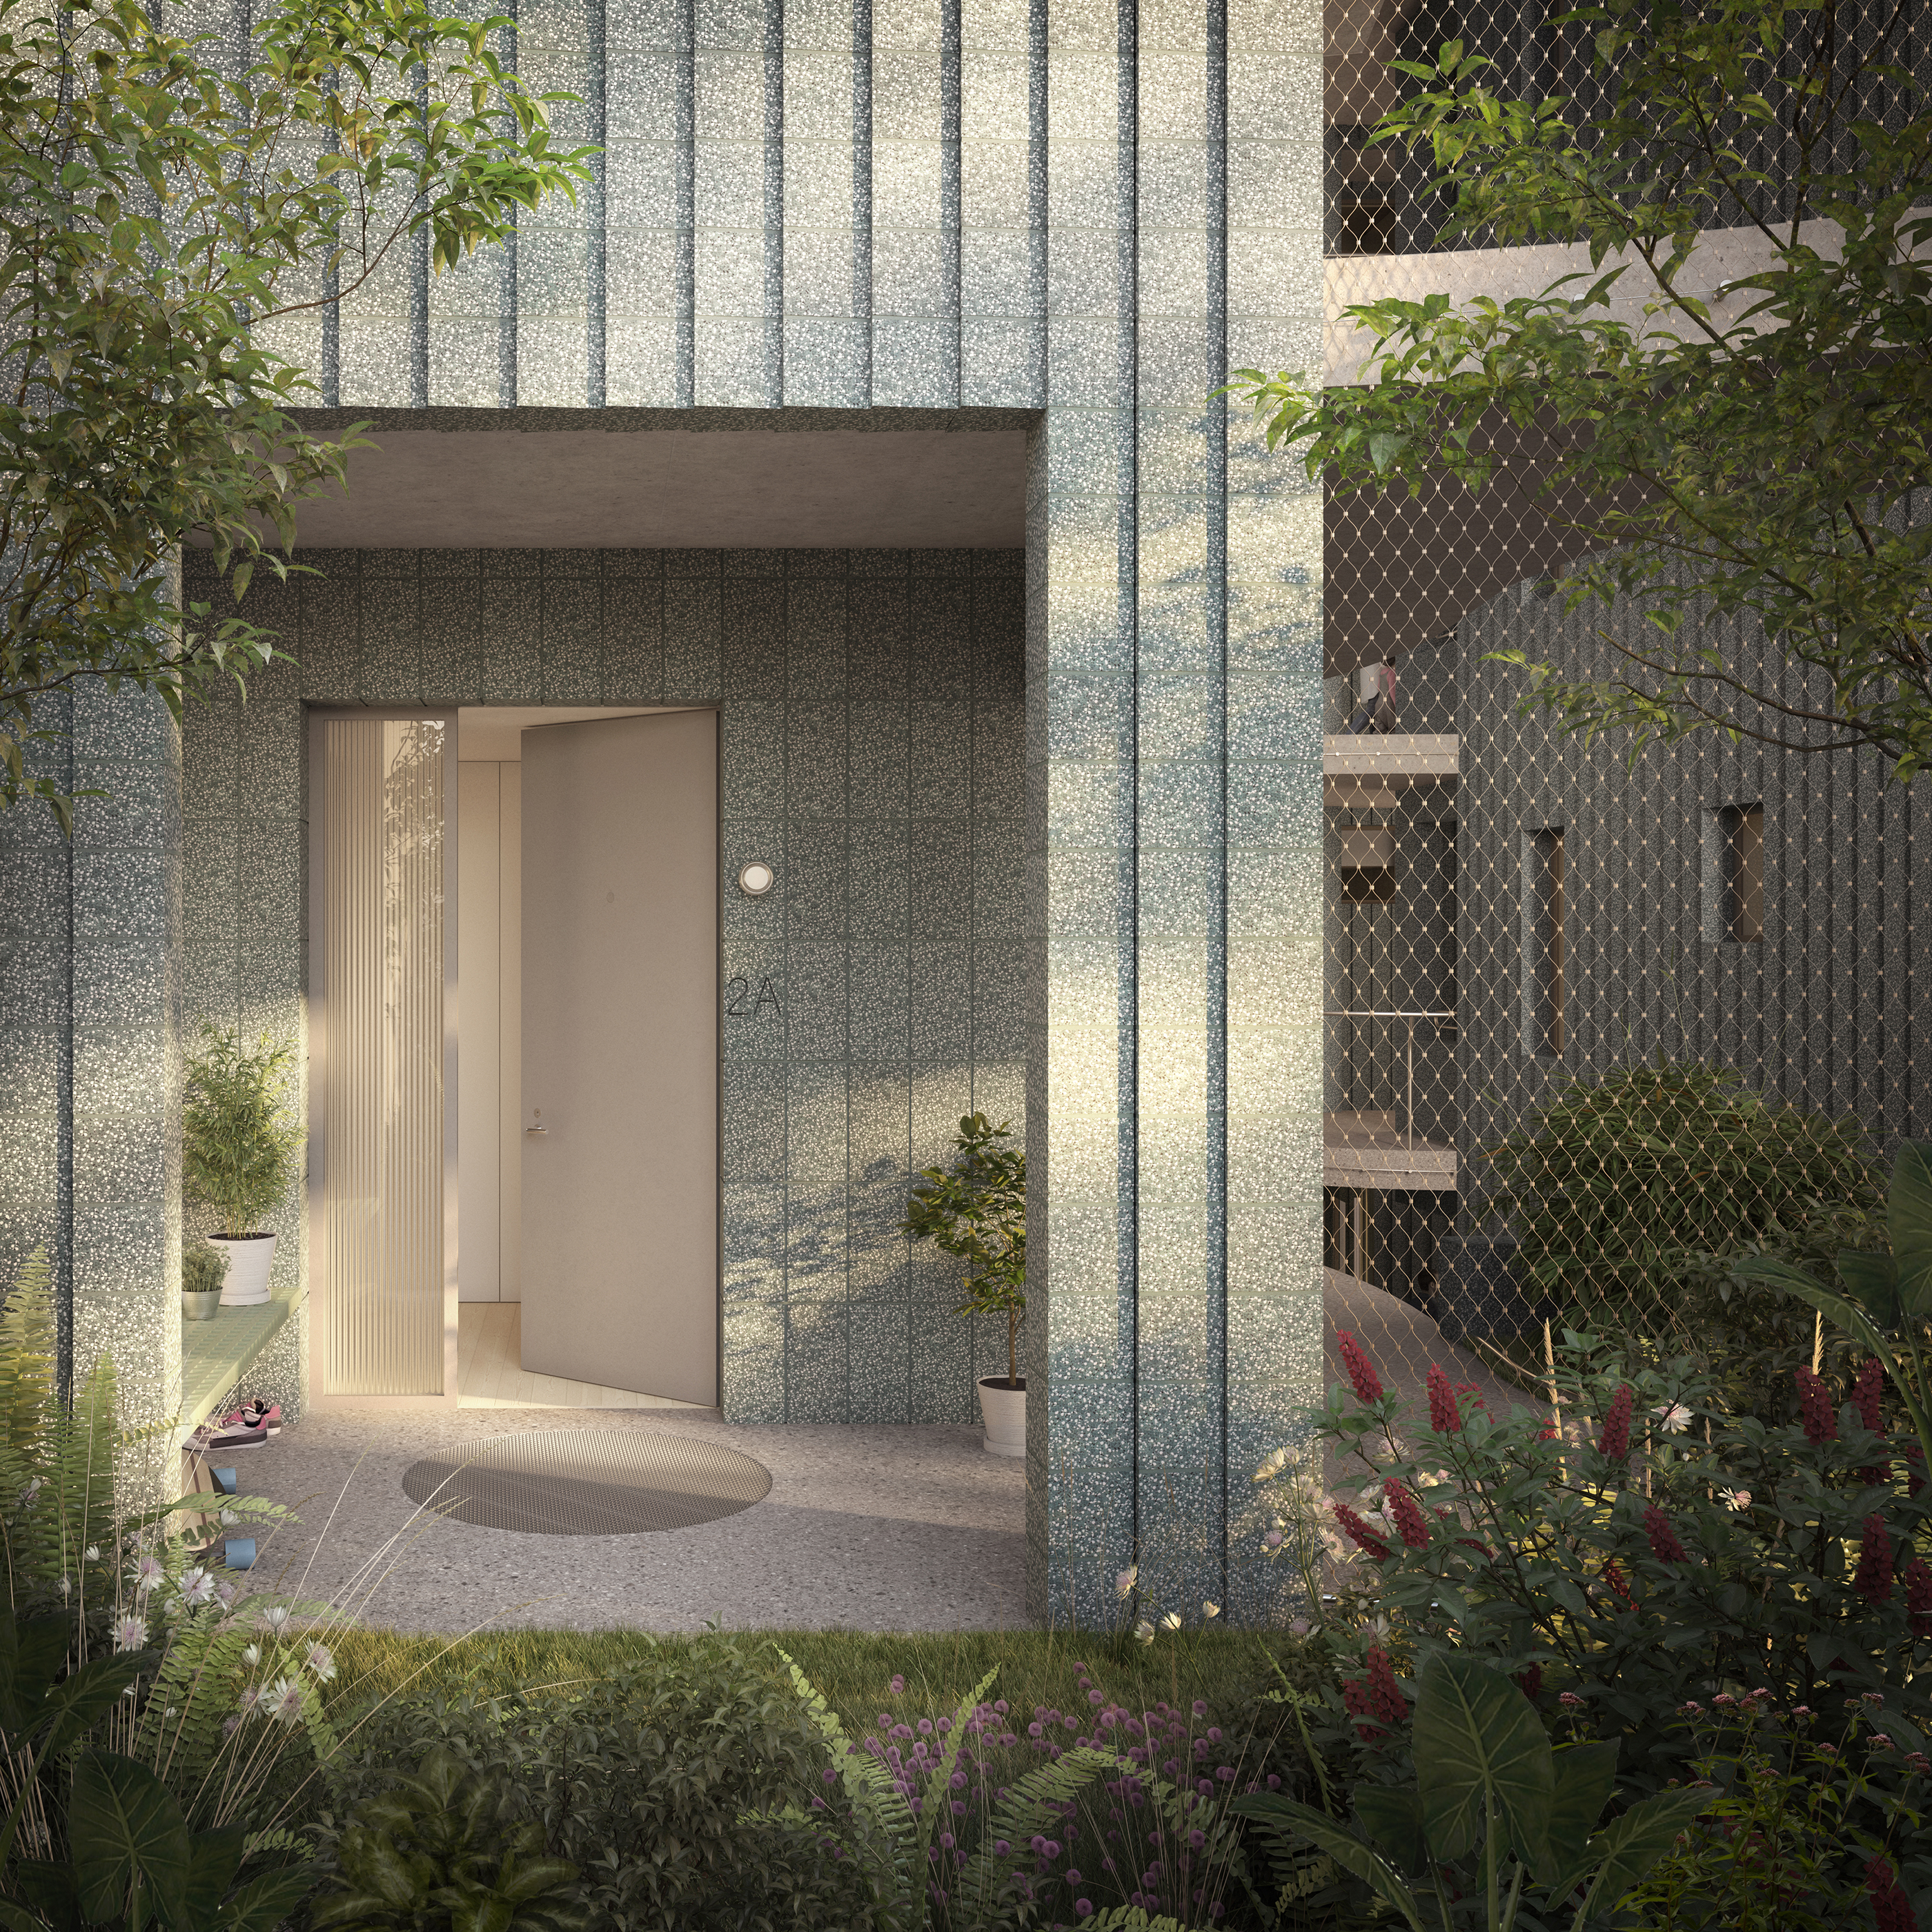 rendering of an entrance to a new concrete apartment building